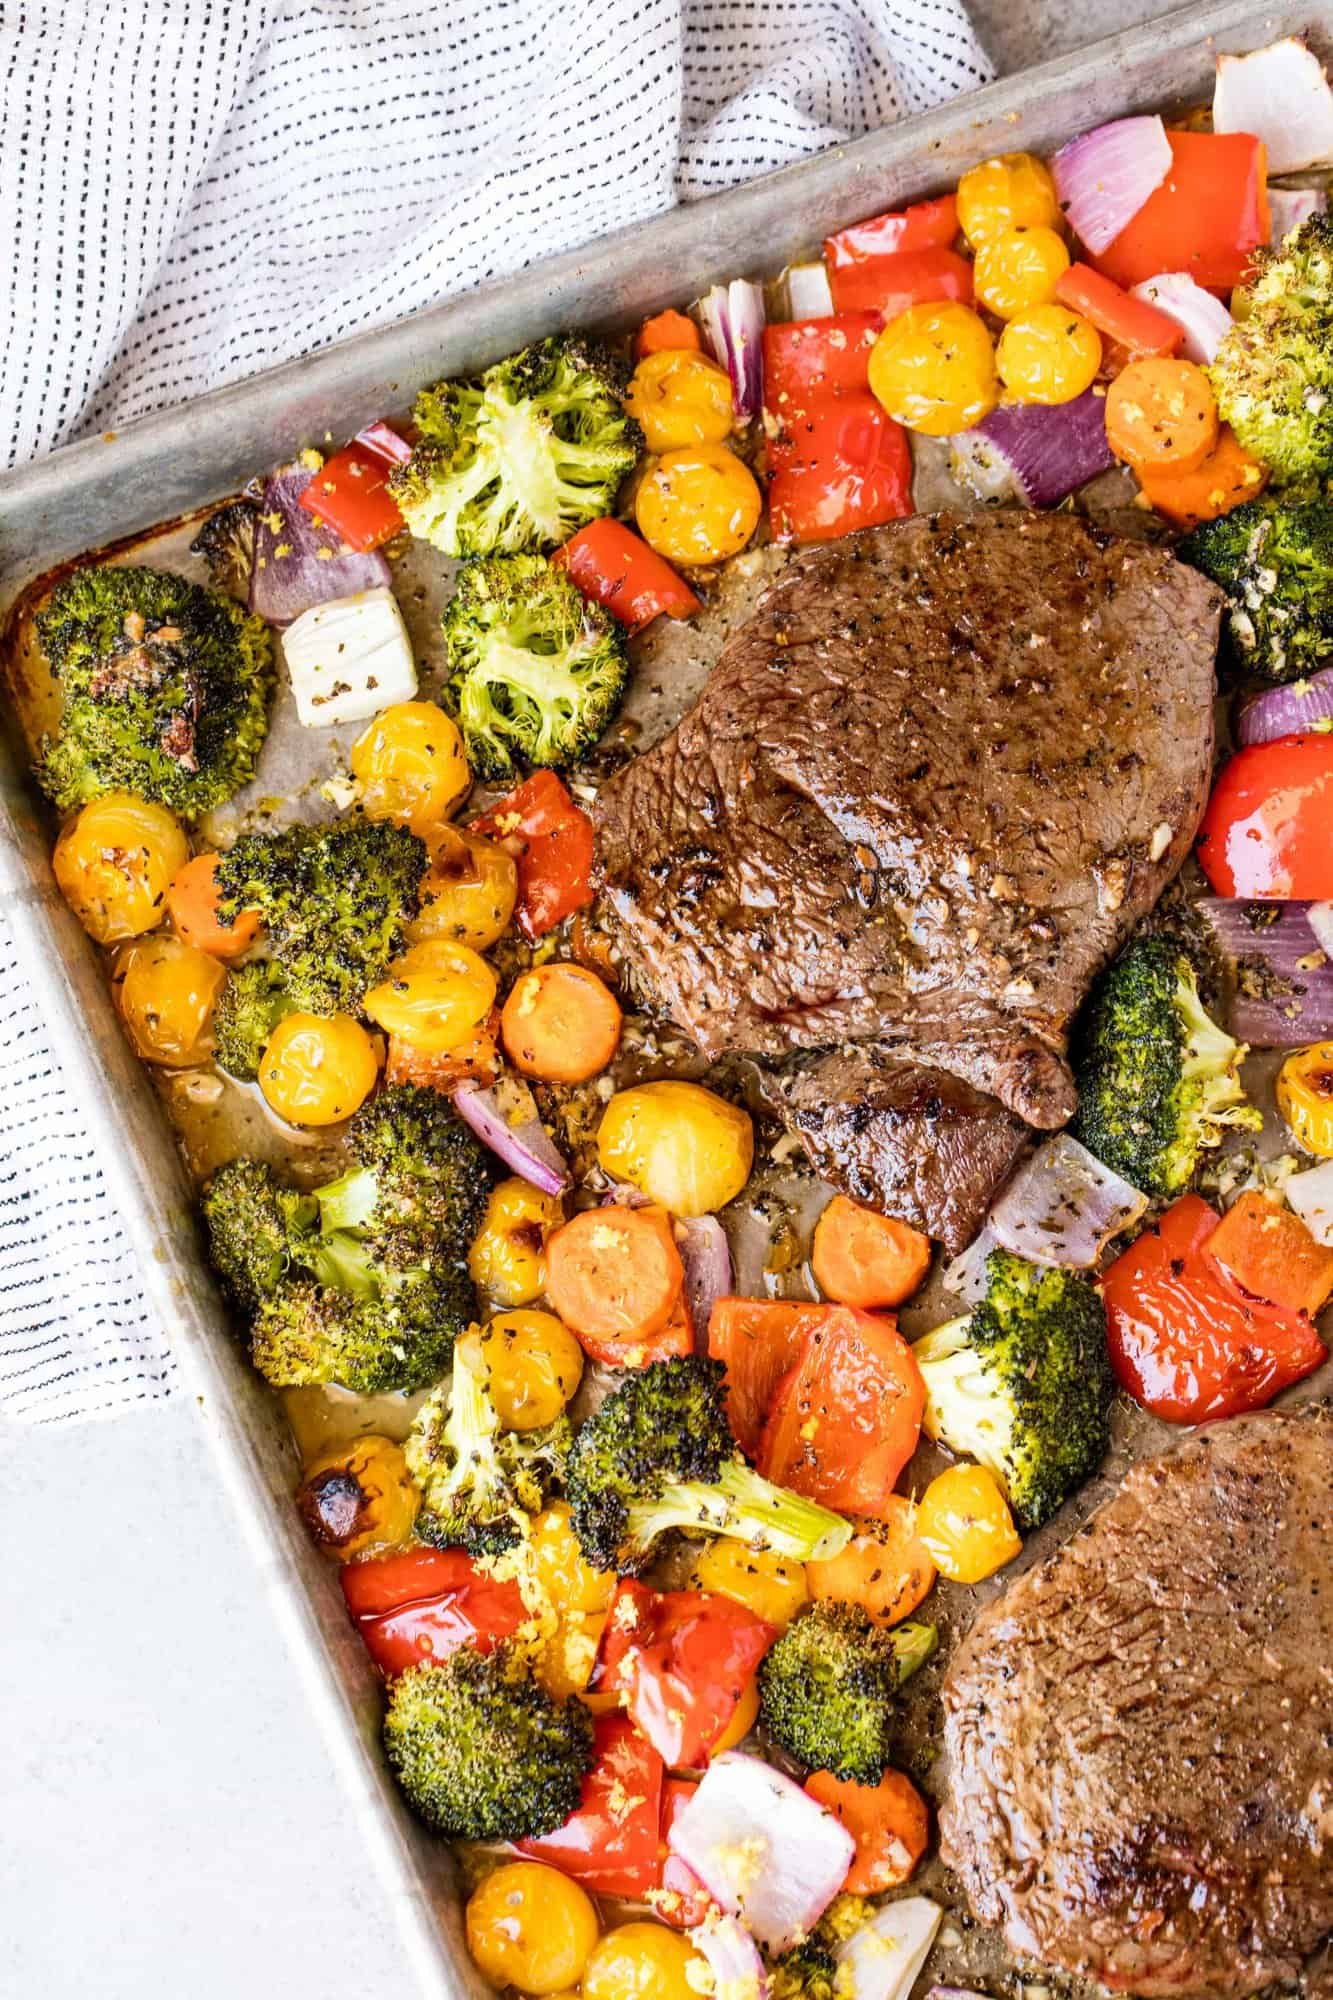 Italian Sheet Pan Steak and Veggies is a one pan meal with a colorful medley of vegetables and an Italian inspired butter sauce that keeps everything moist and flavorful.